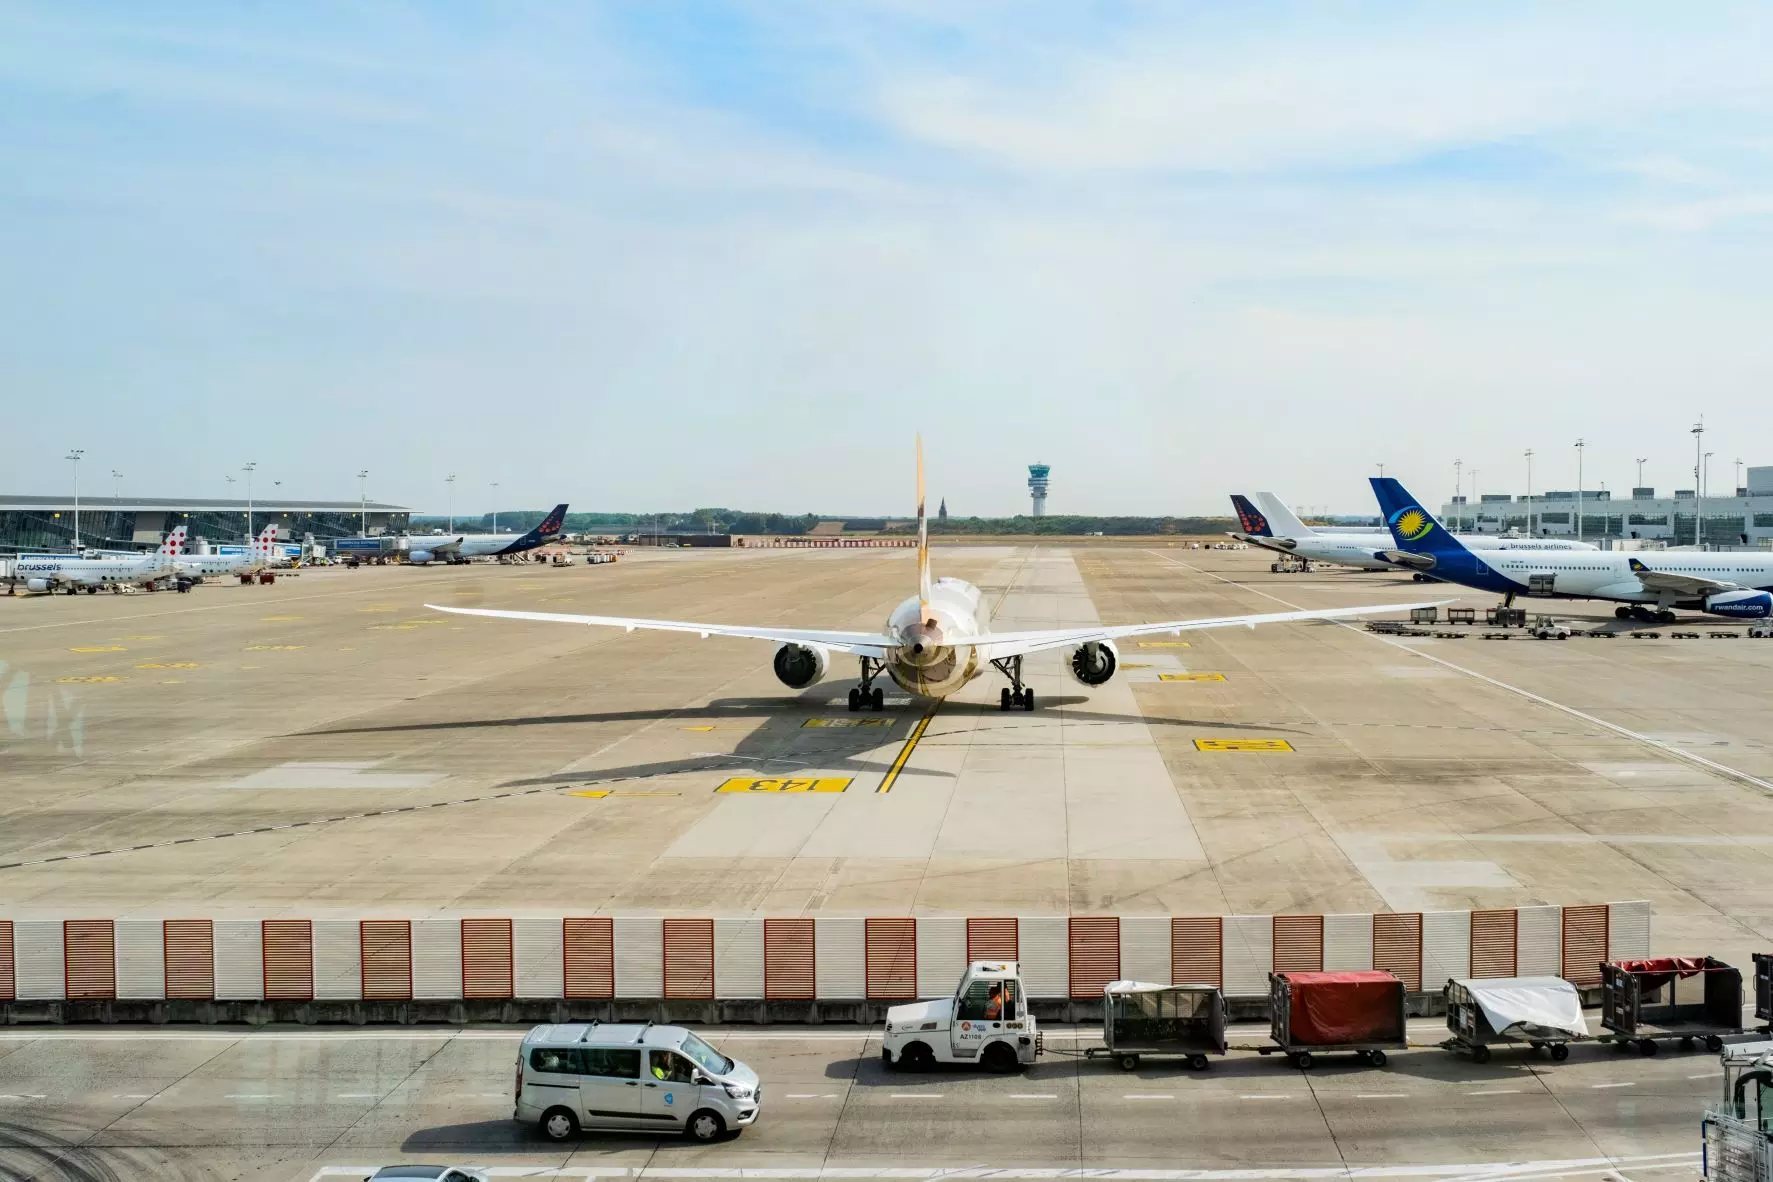 Cargo volumes at Brussels airport show 8% dip in 2022 compared to 2021, up 16% from 2019